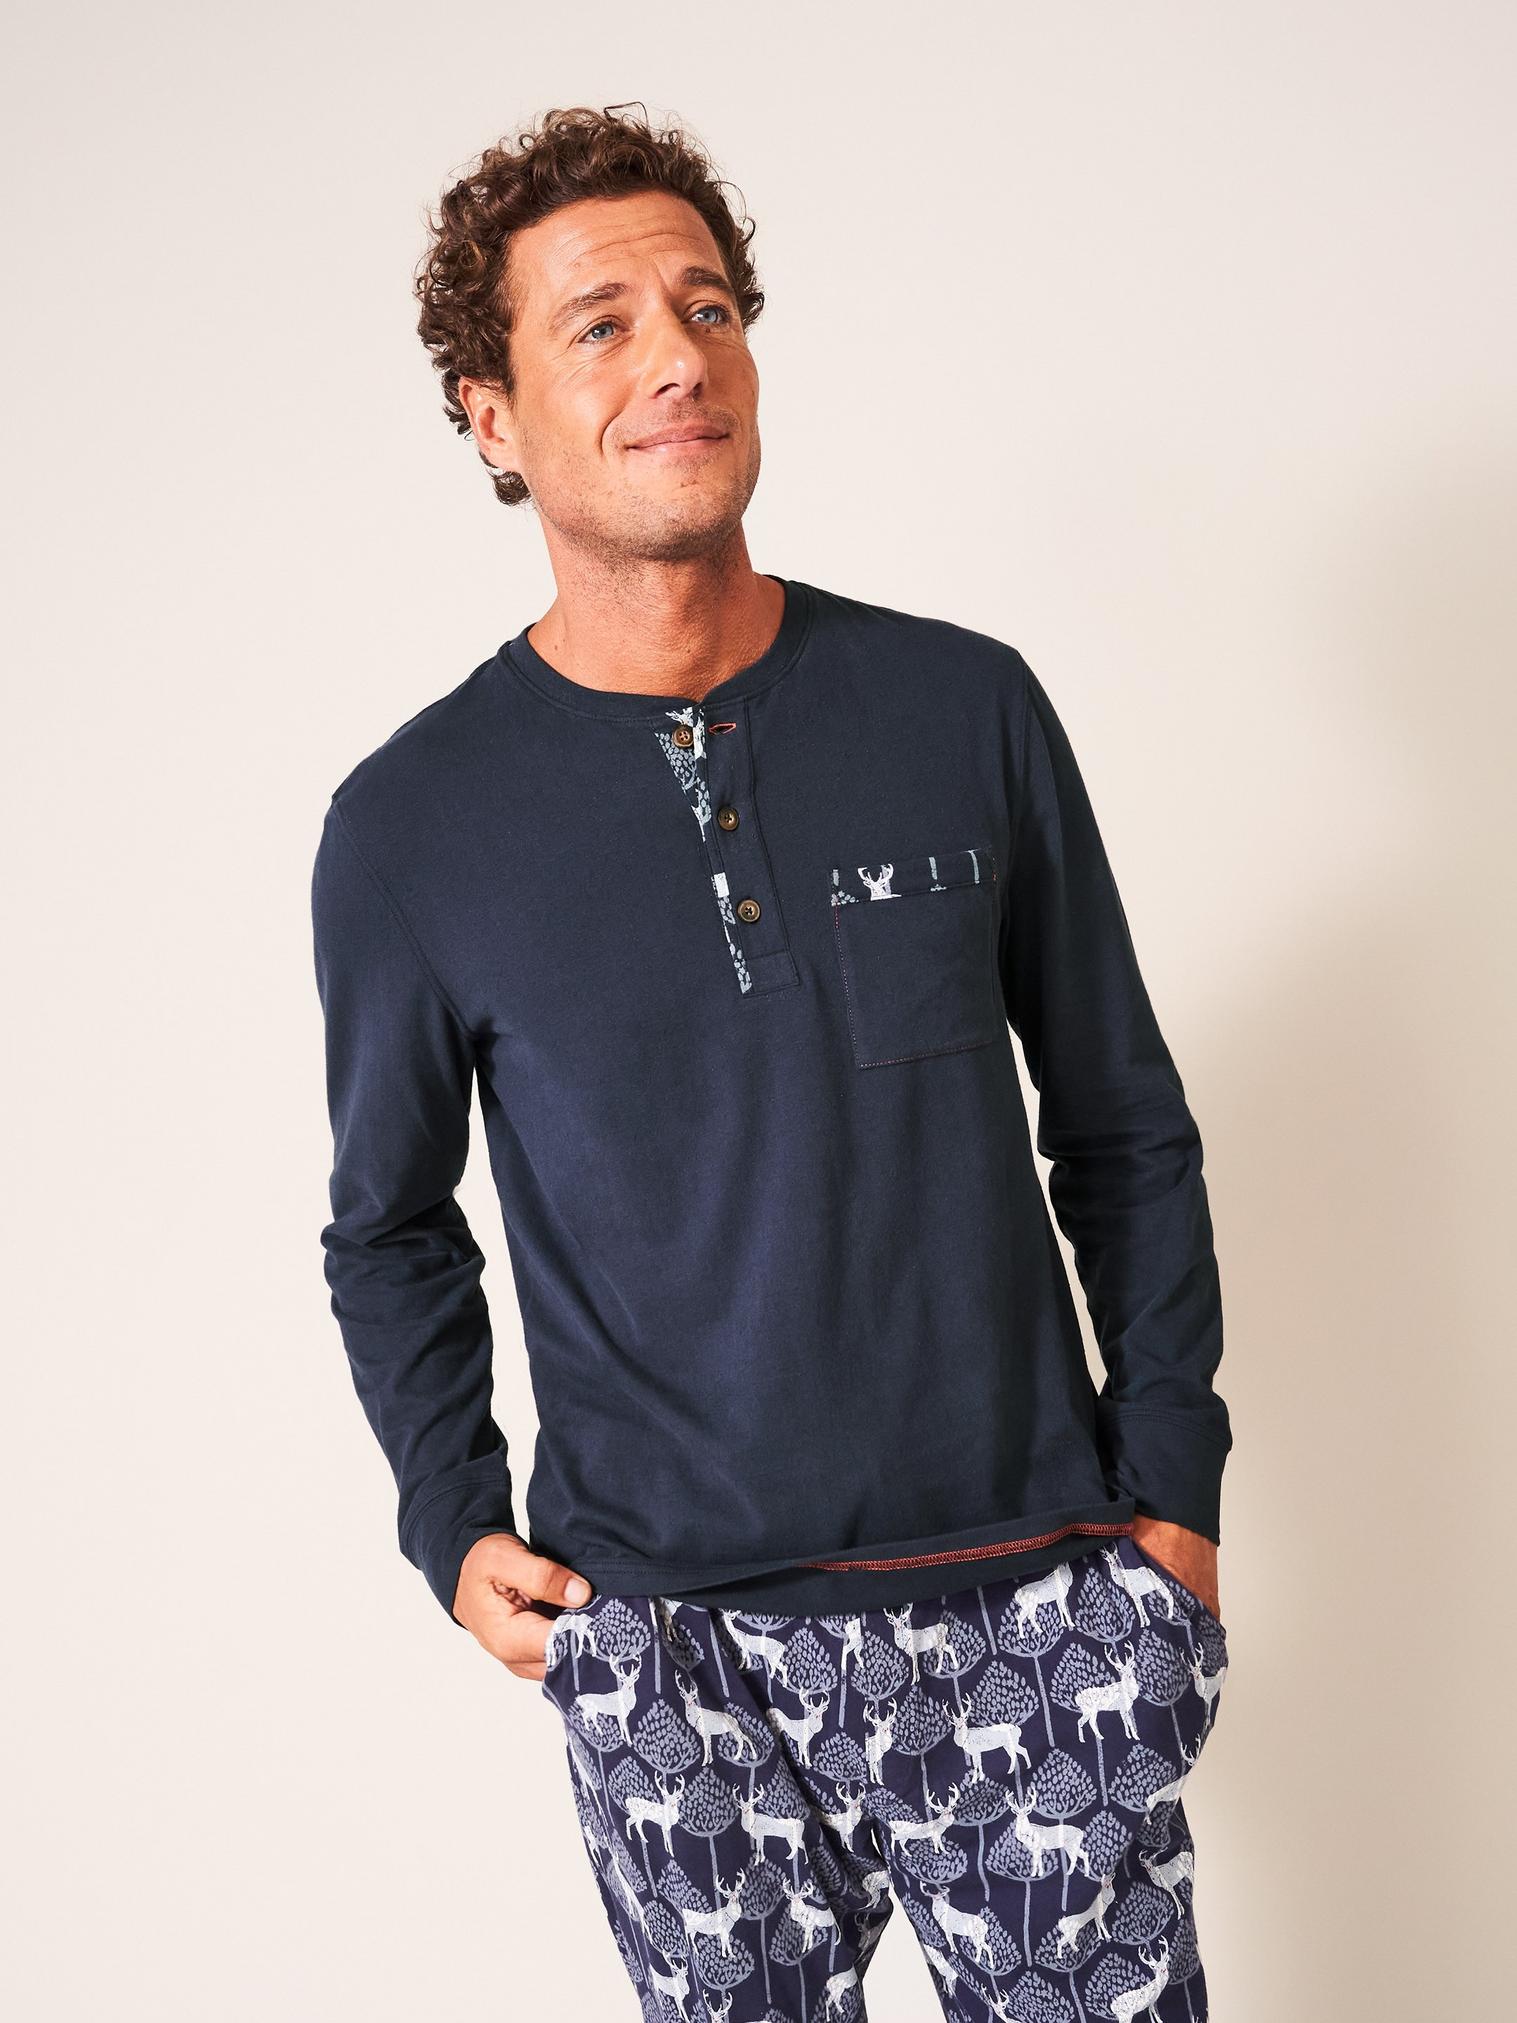 Stag Family Time Jersey PJ Top in NAVY MULTI - LIFESTYLE